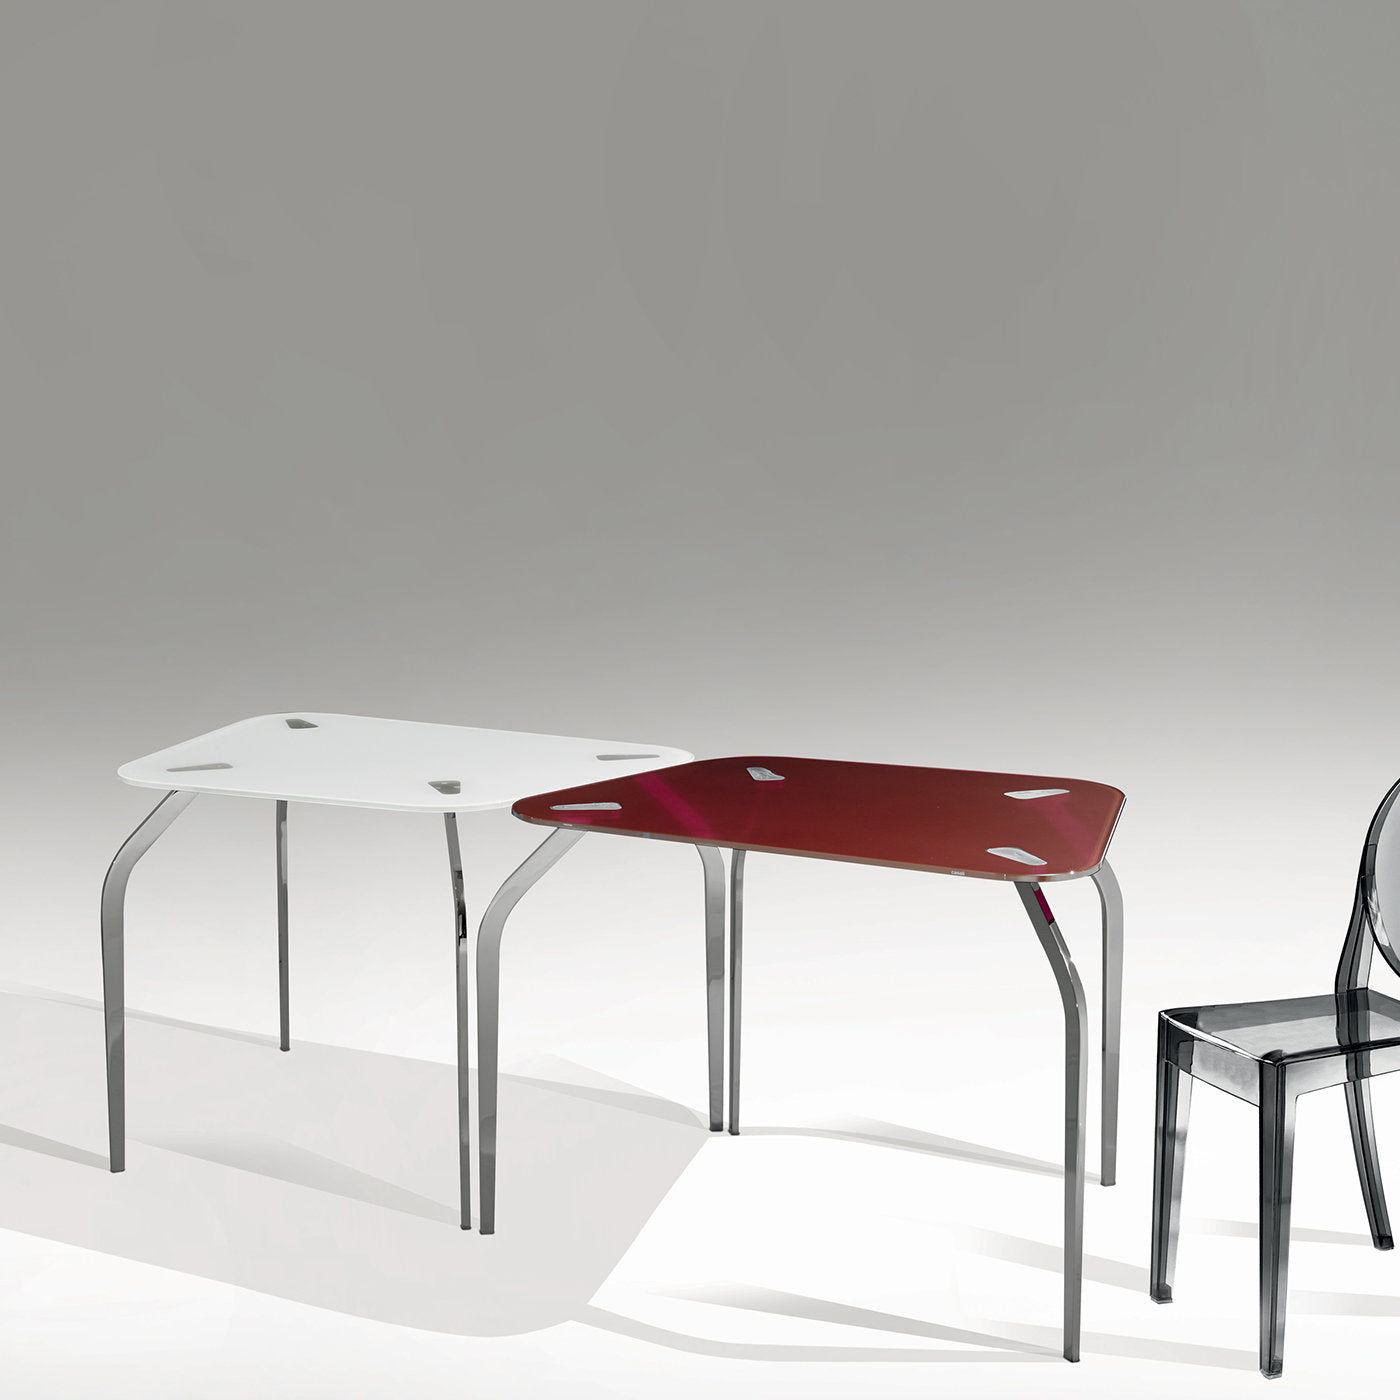 Mira Red and White Dining Table by Mac Stopà - Alternative view 2